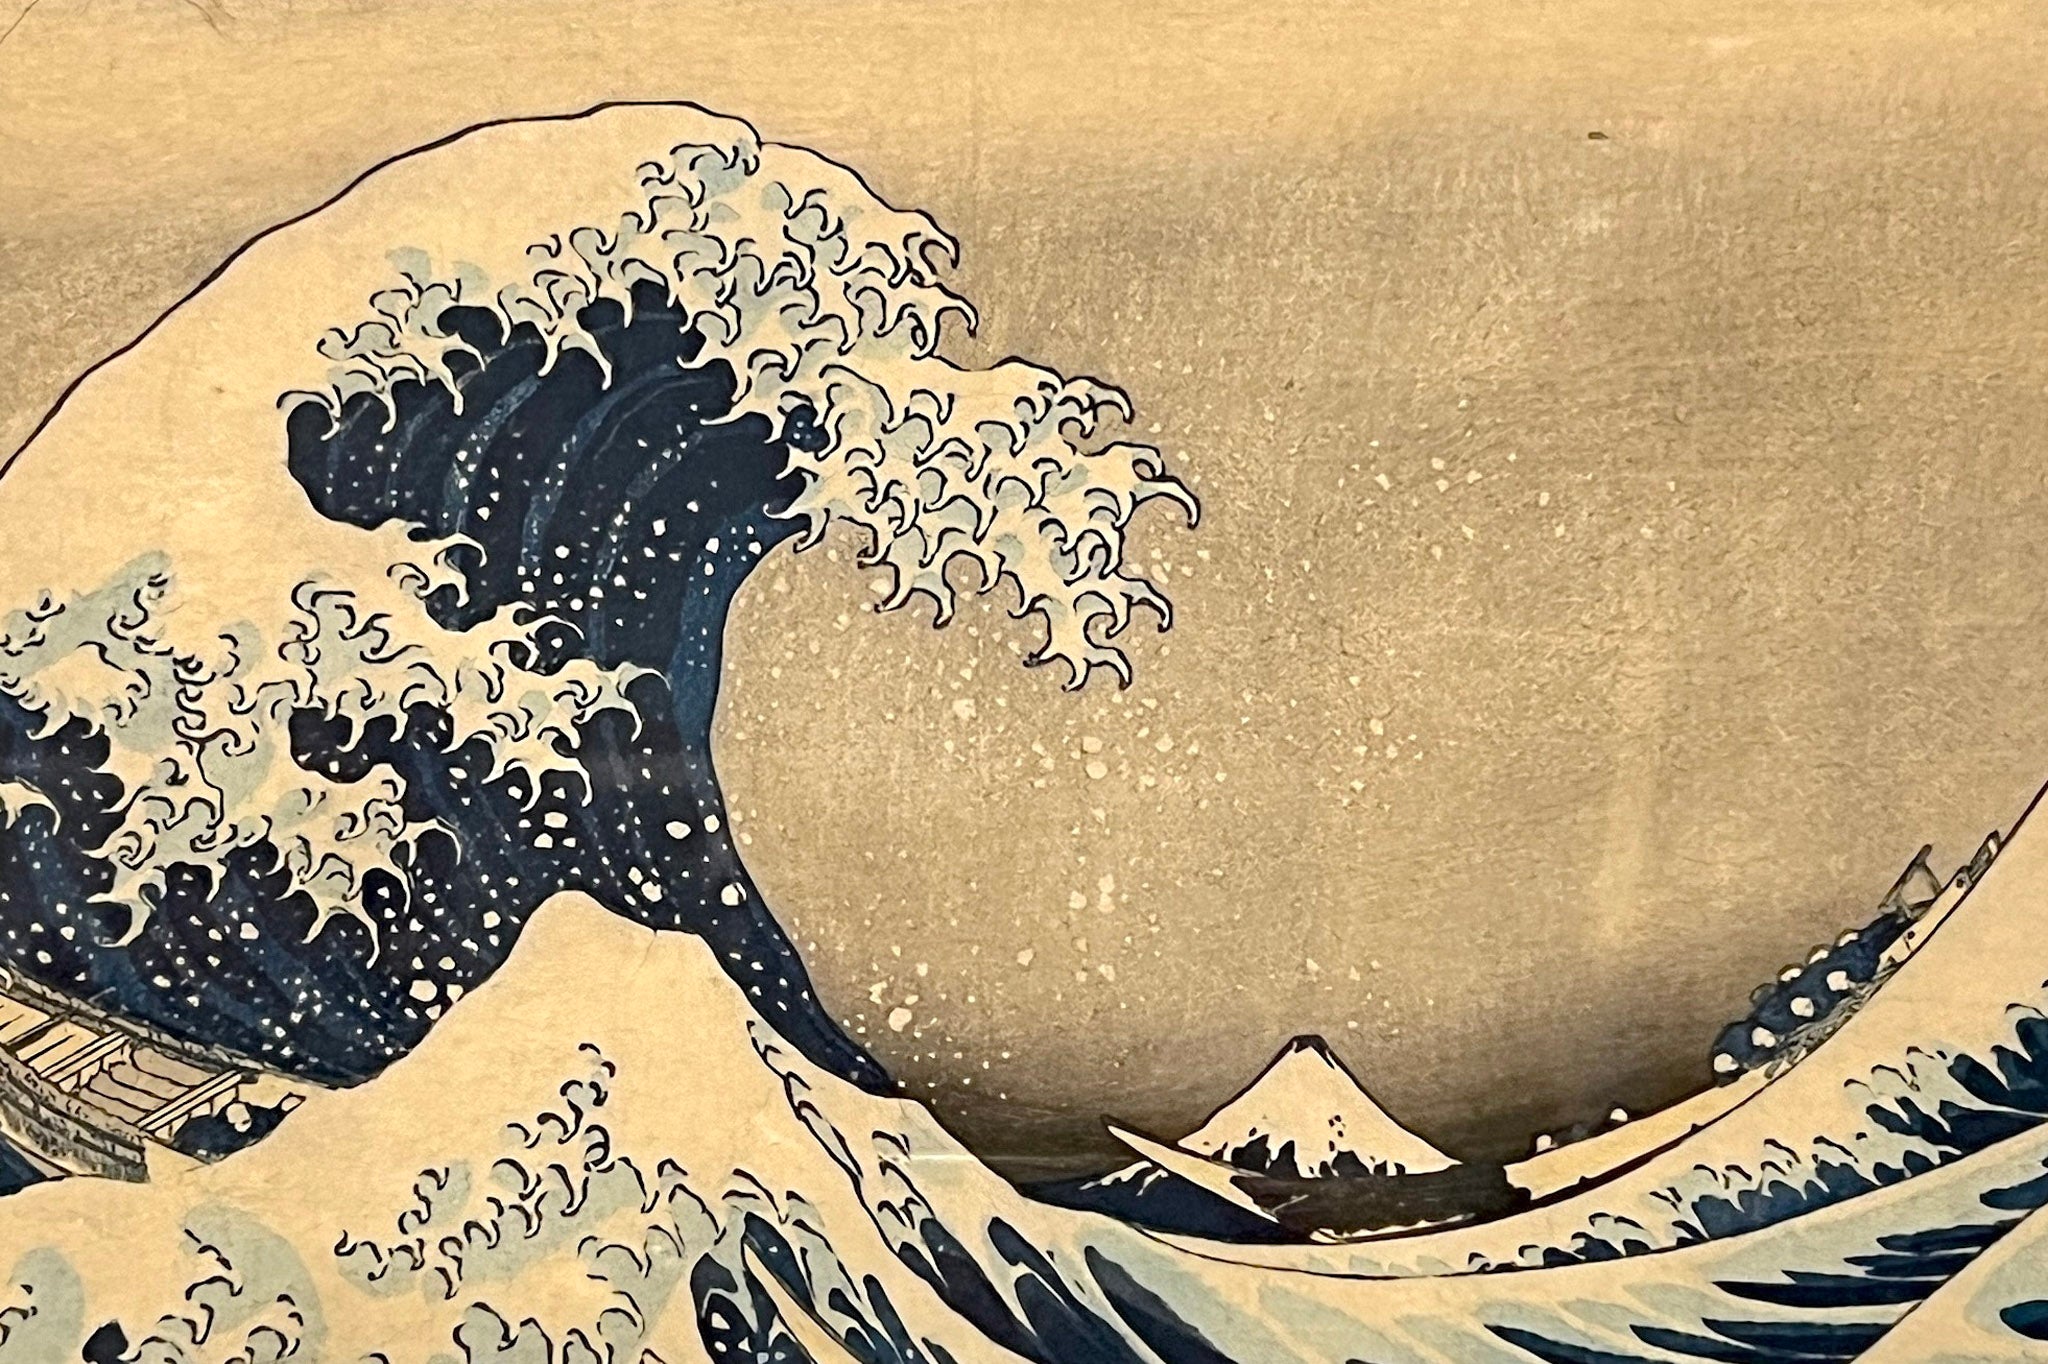 Hokusai, The Great Wave, detail